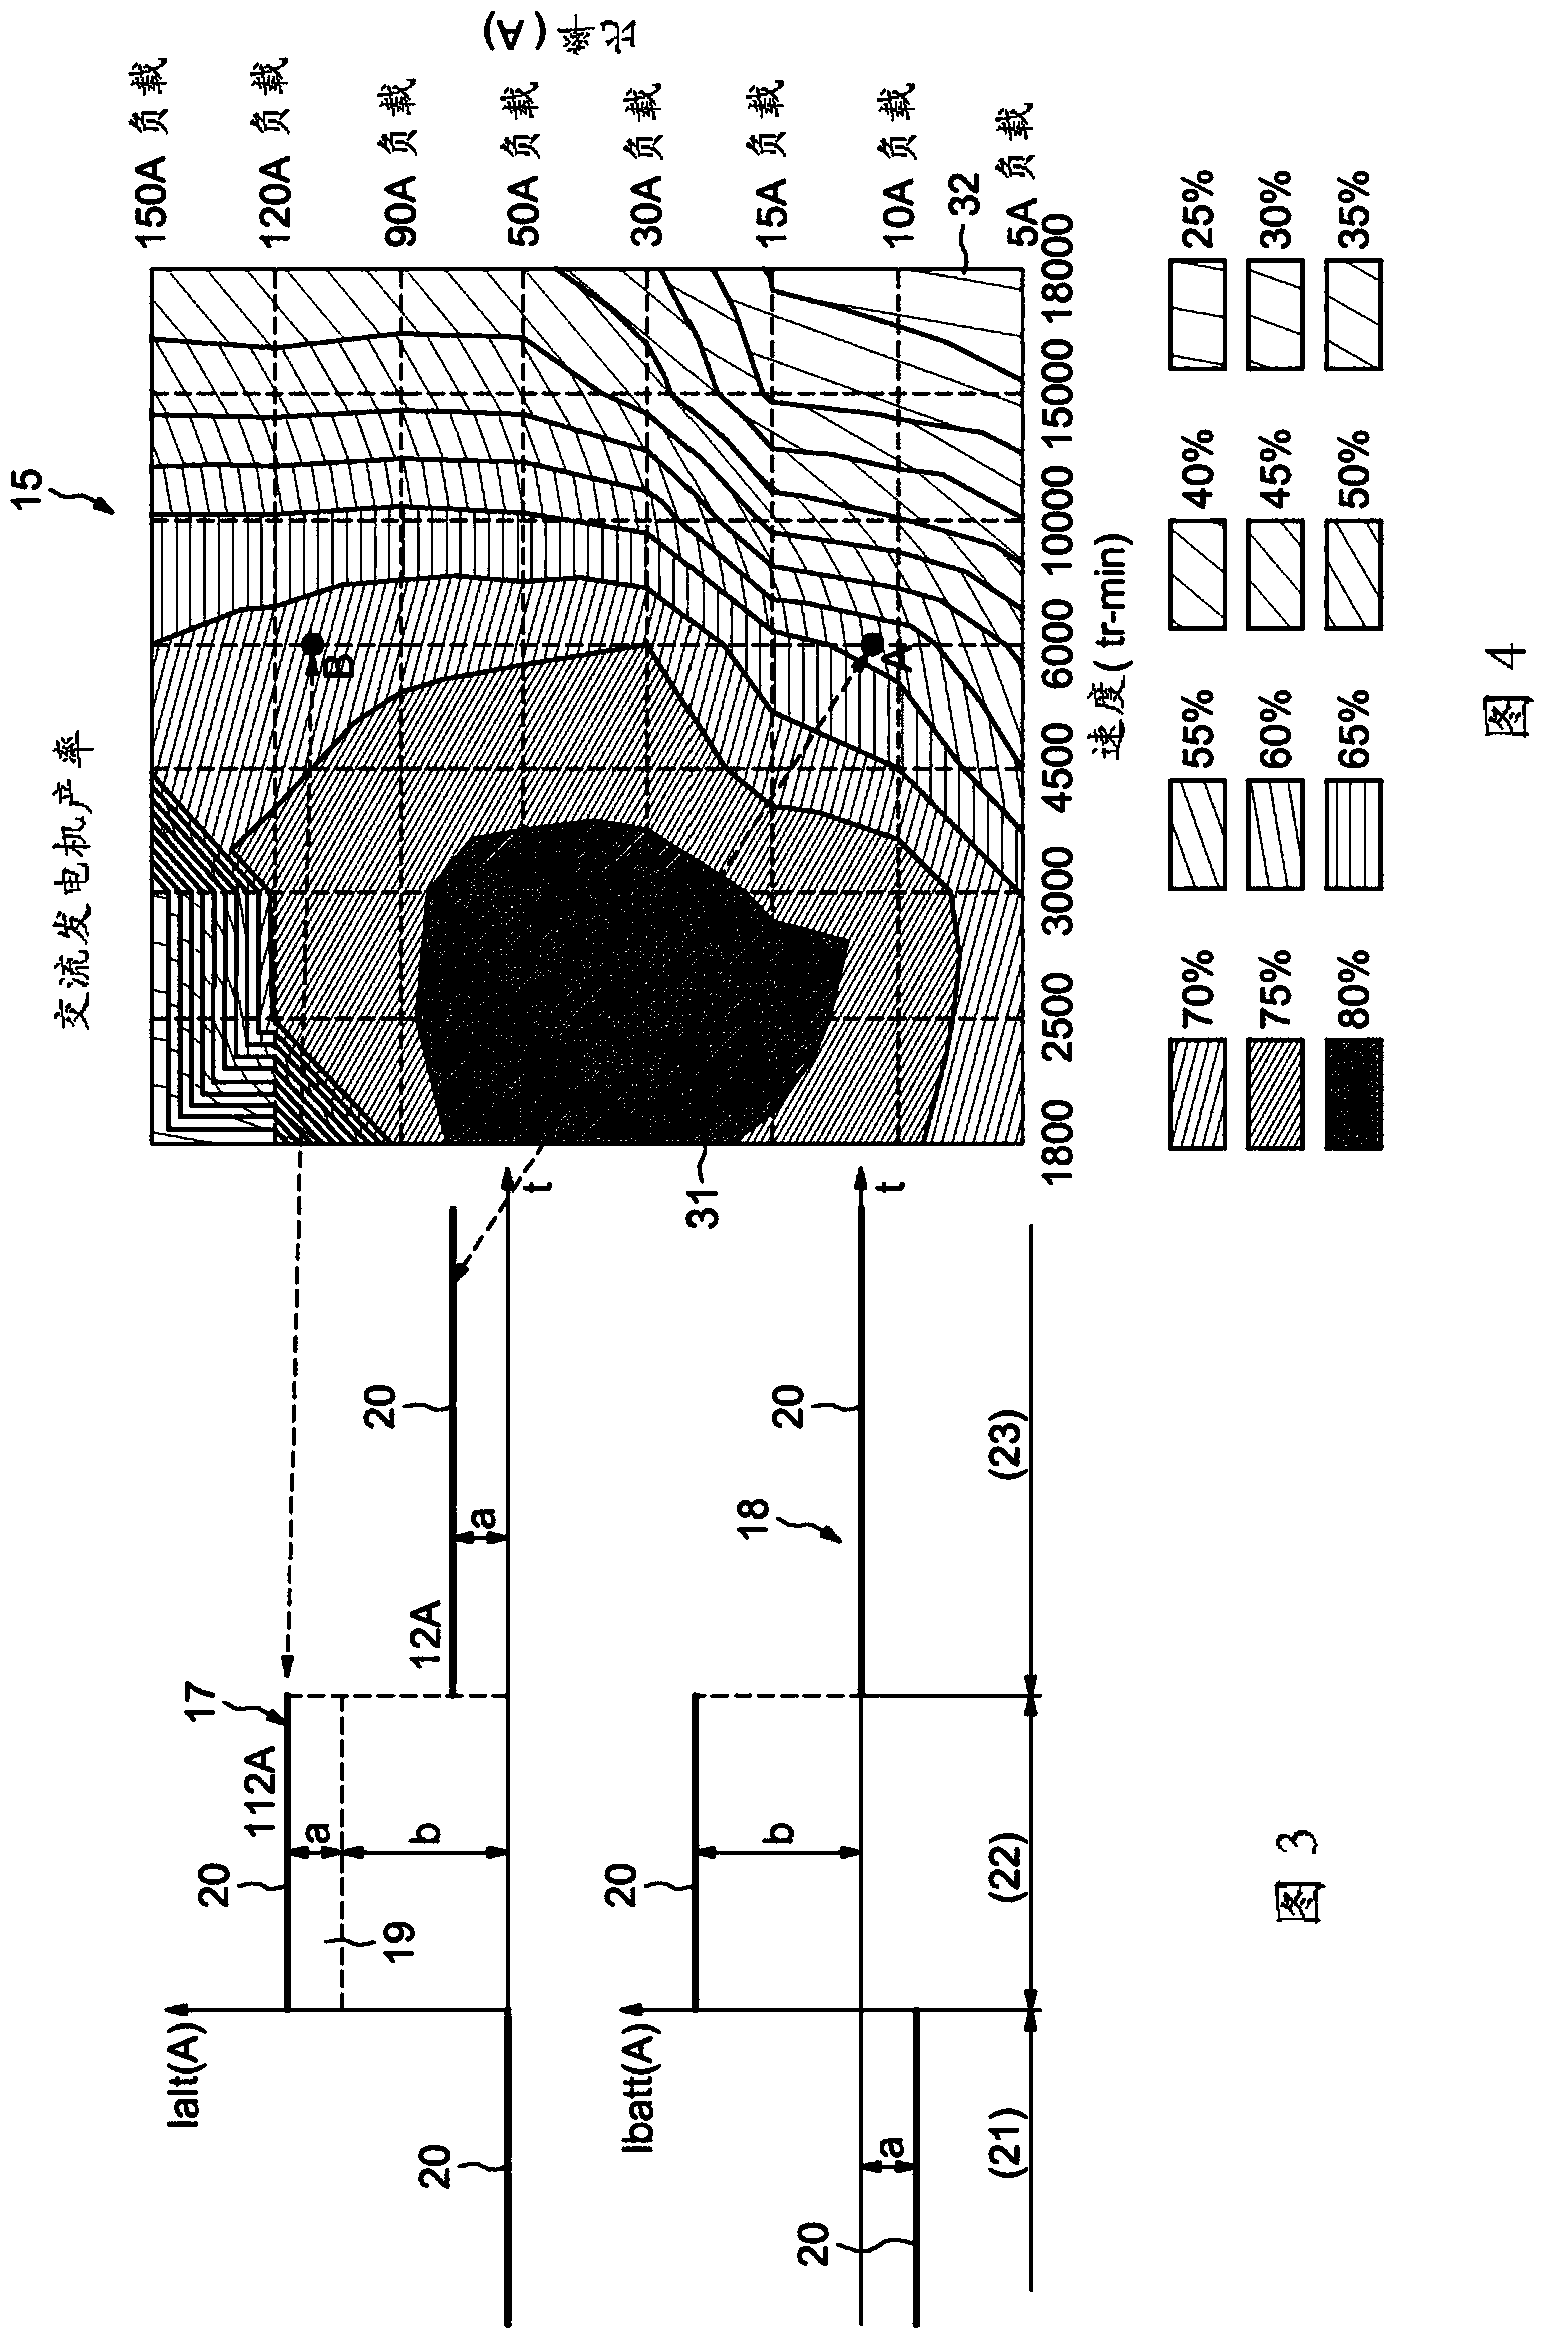 Method for managing an alternator combined with at least one power battery and driven by a heat engine